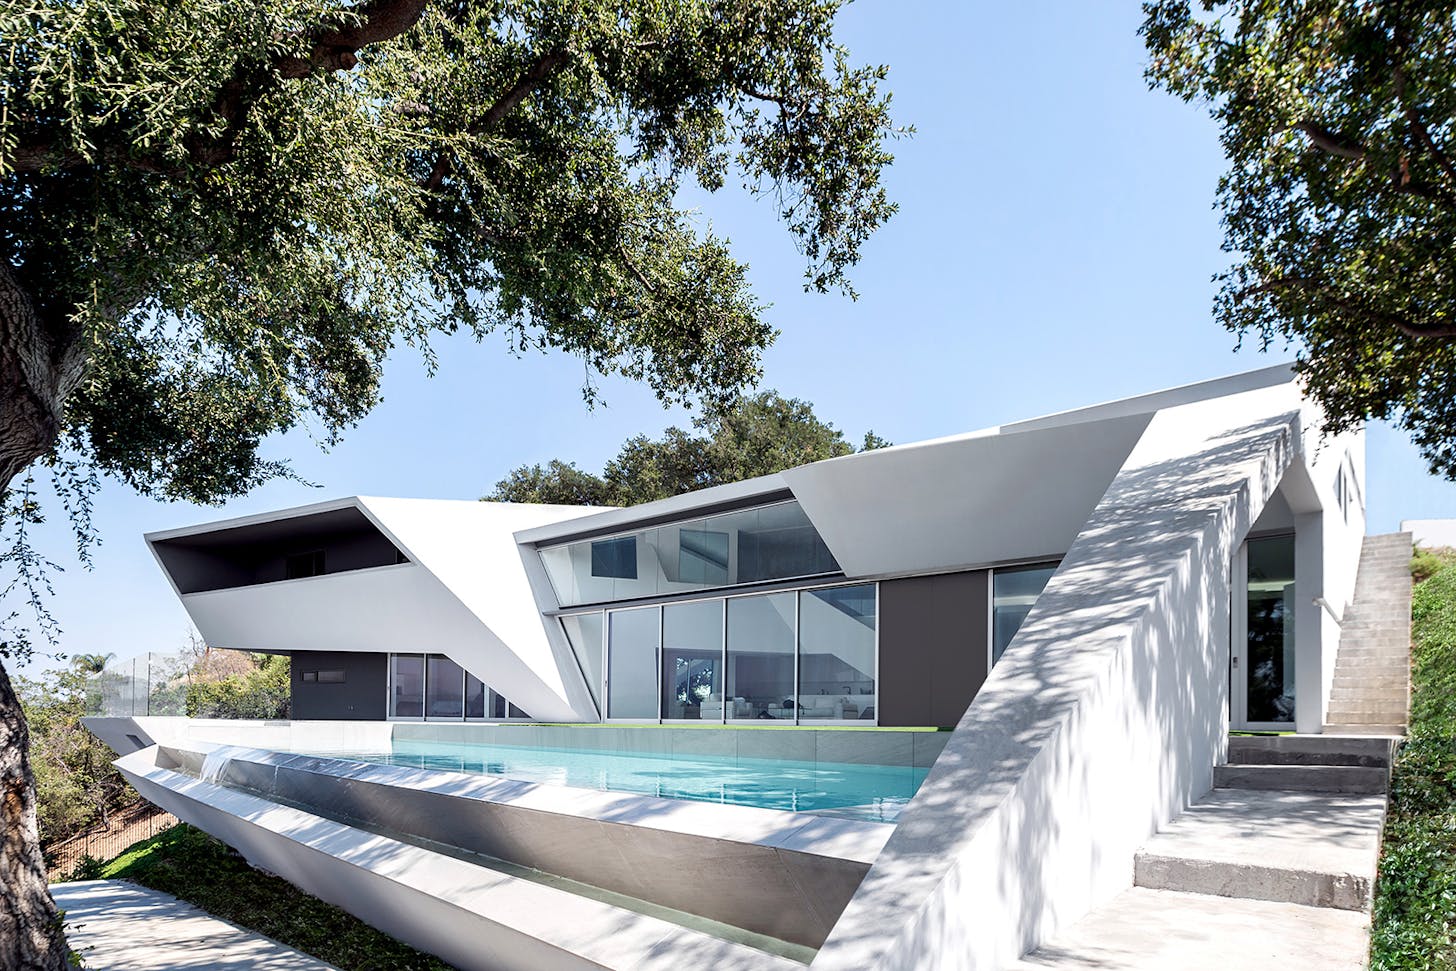 Spec Houses From The Future An Interview With LA Based Design